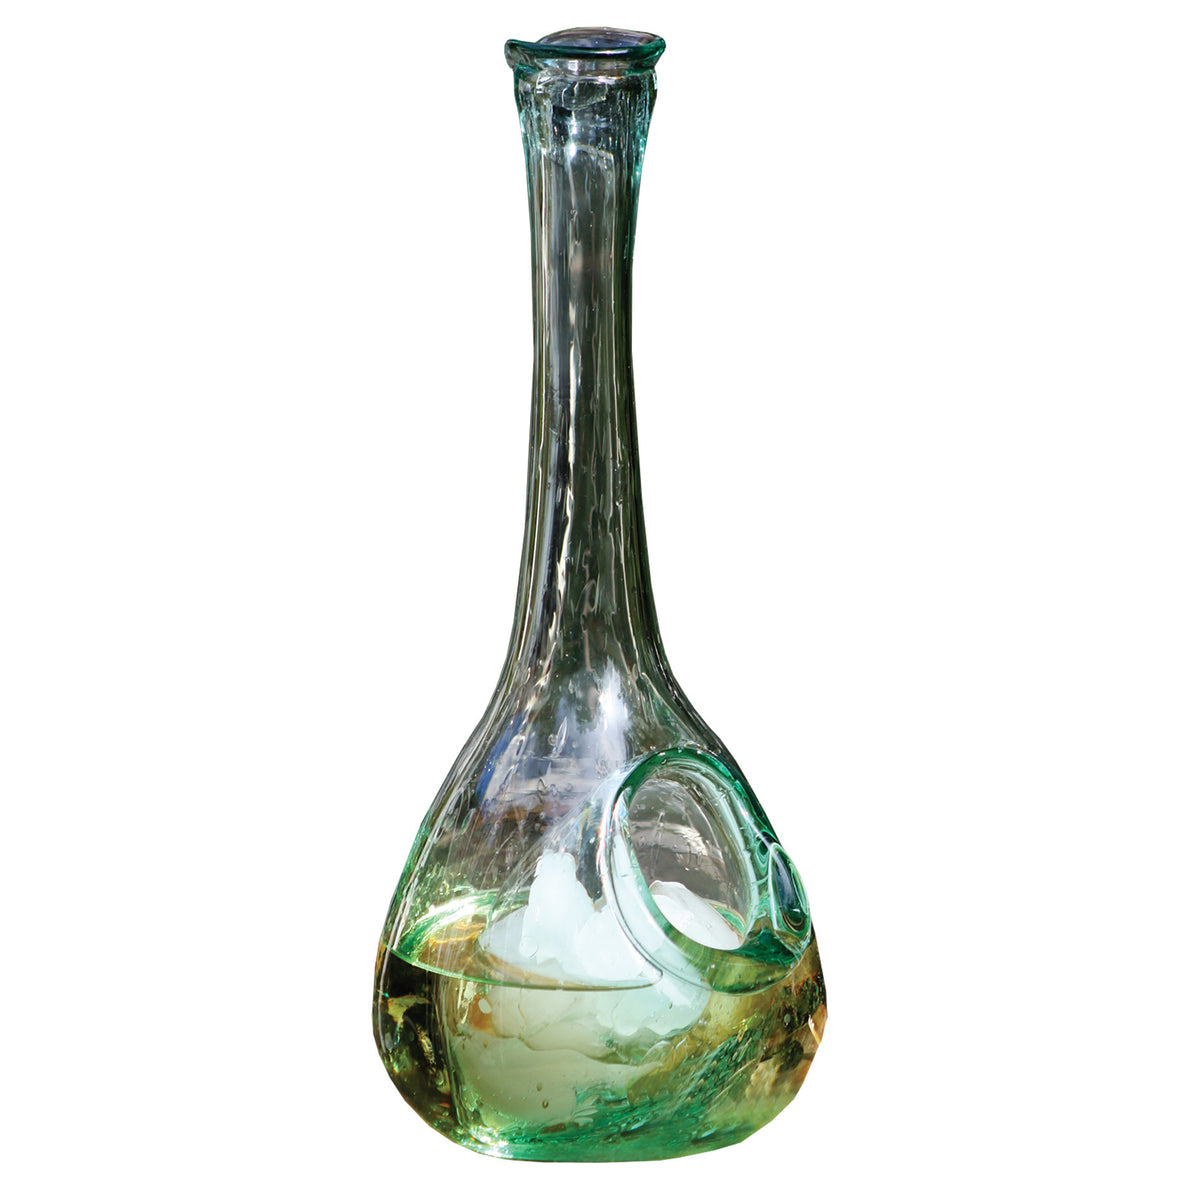 https://cdn.shopify.com/s/files/1/0010/0852/products/White_Modern_Glass_Wine_Decanter_With_Ice_Pocket_1200x1200.jpg?v=1571436293